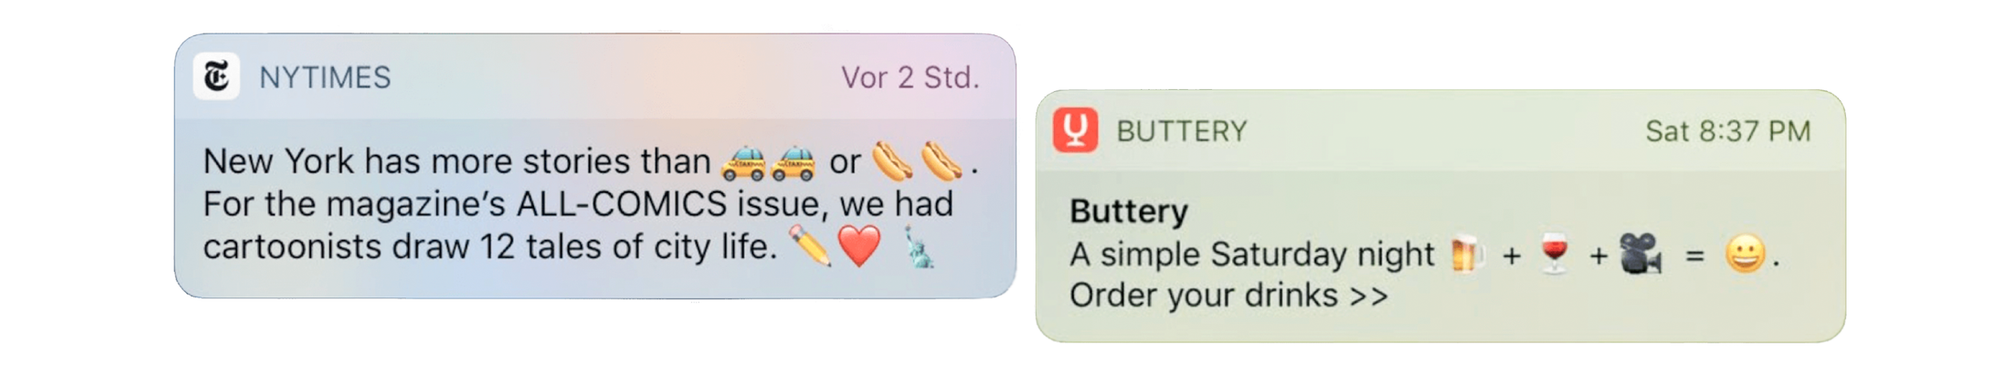 Push notifications with emojis - Examples